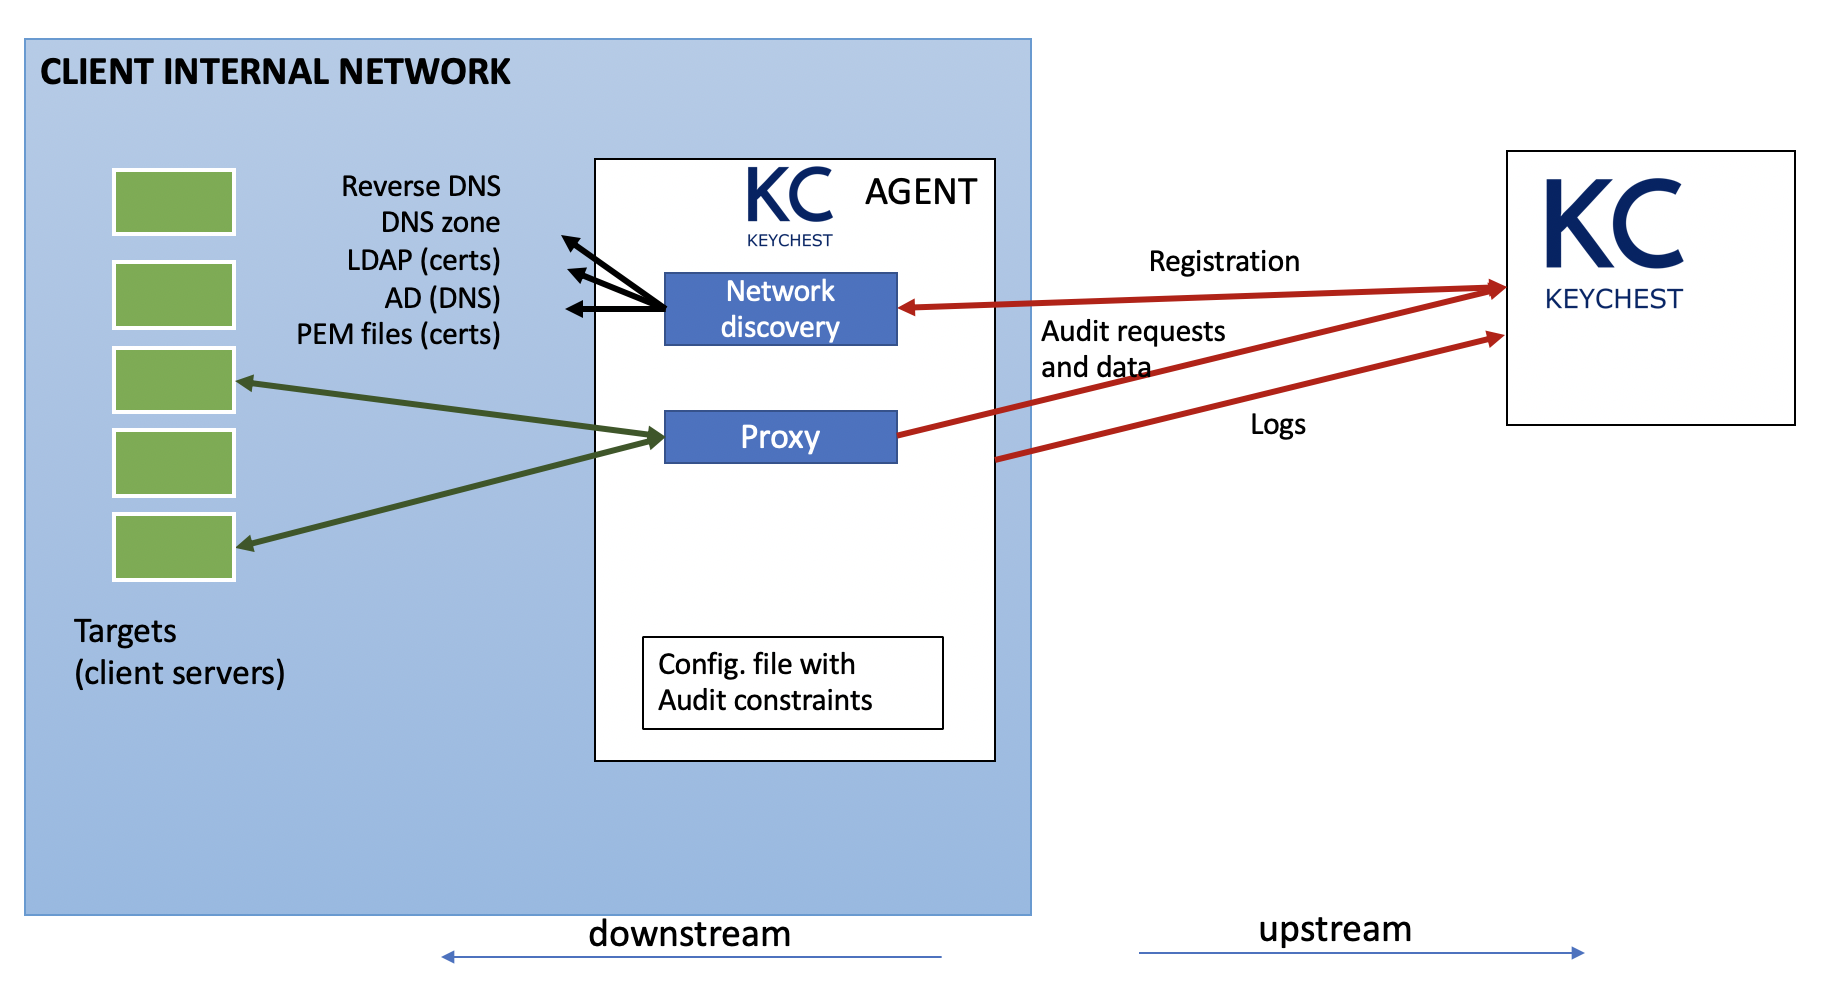 Communication and block diagram of KeyChest agents.